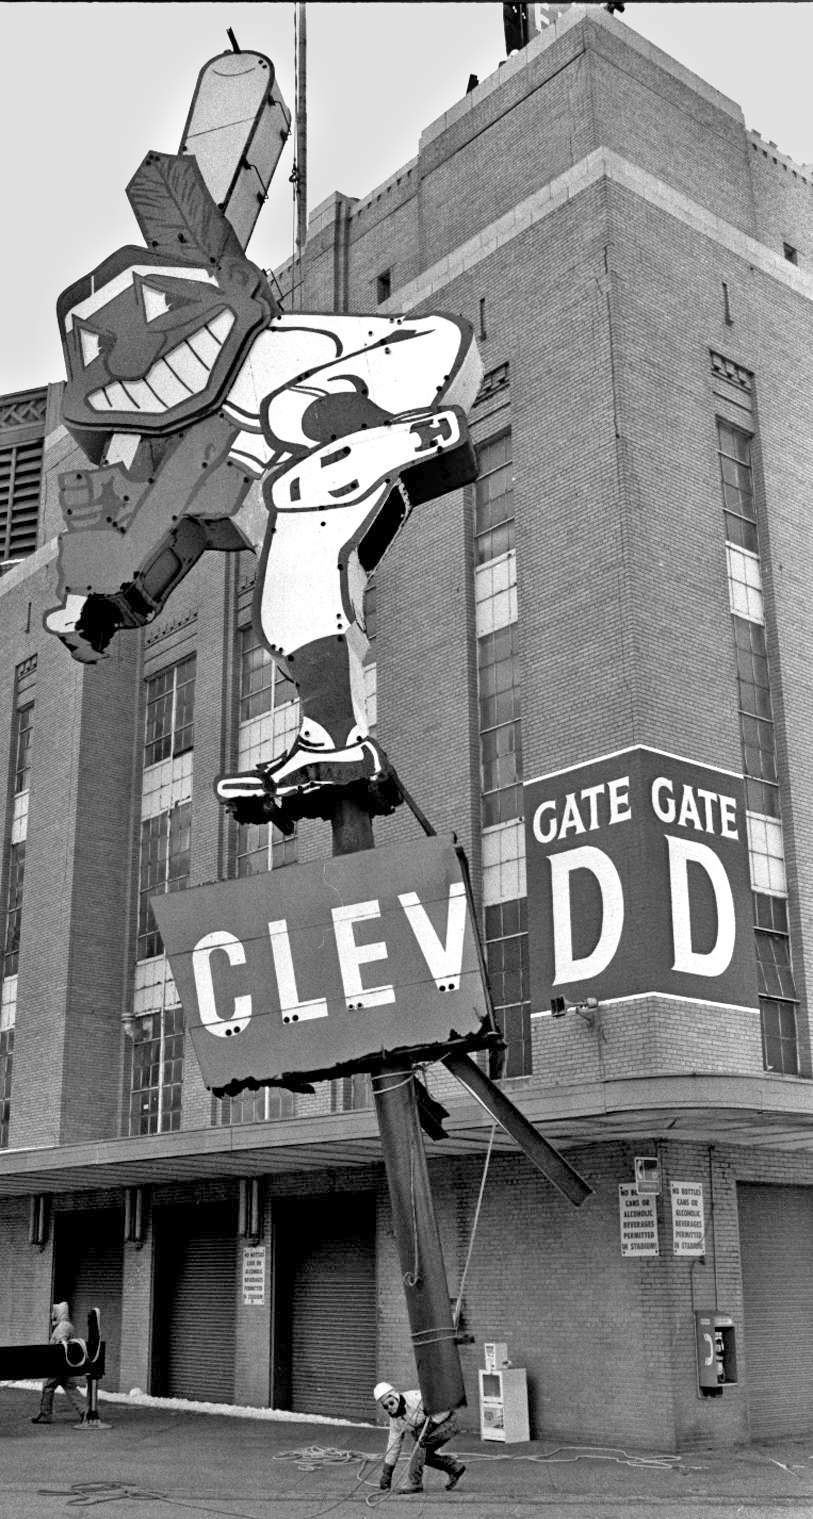 Cleveland Indians logo and Chief Wahoo through the years 